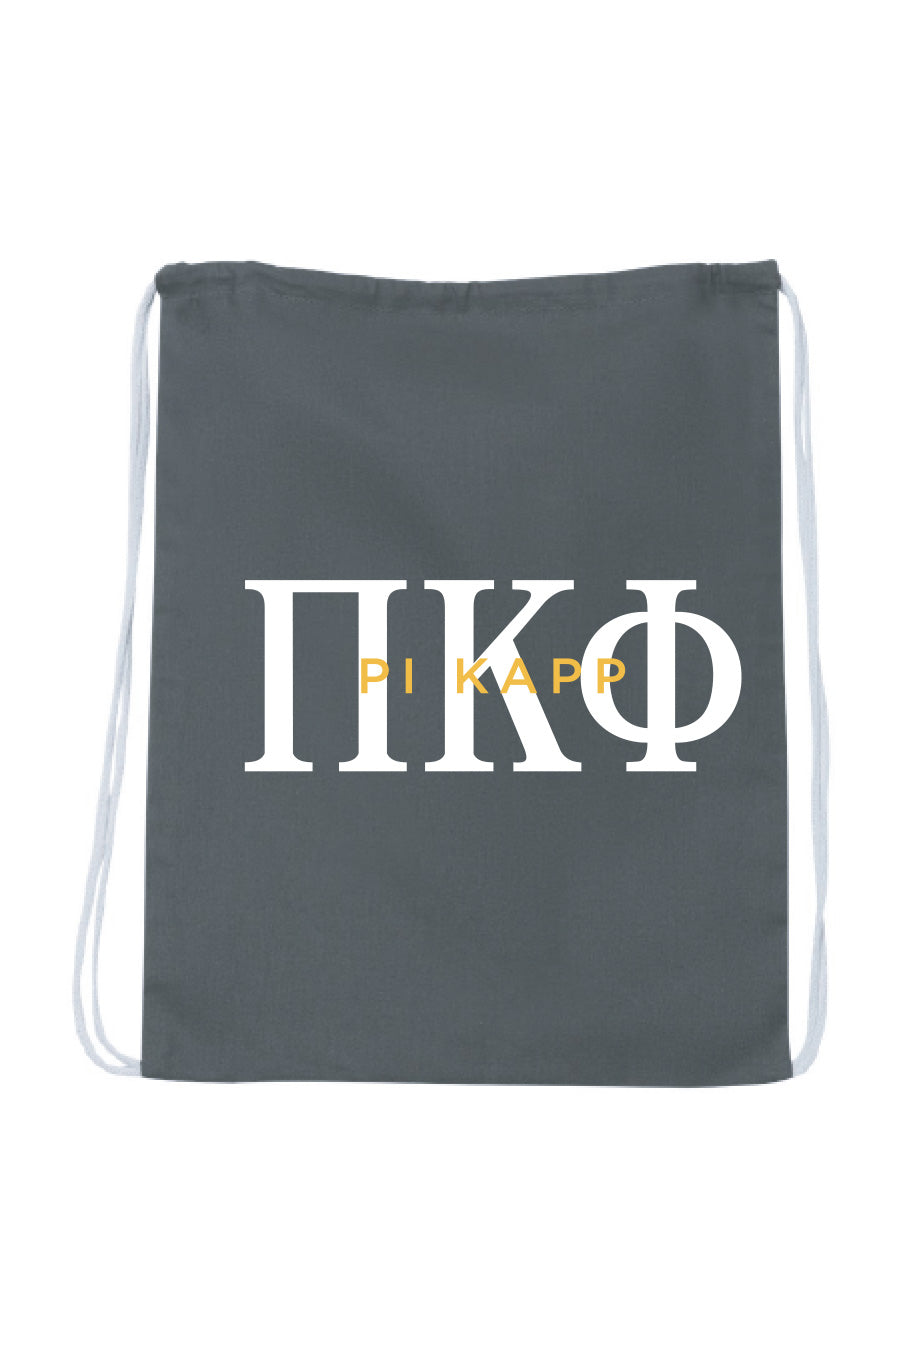 Behind the Letters Drawstring Bag